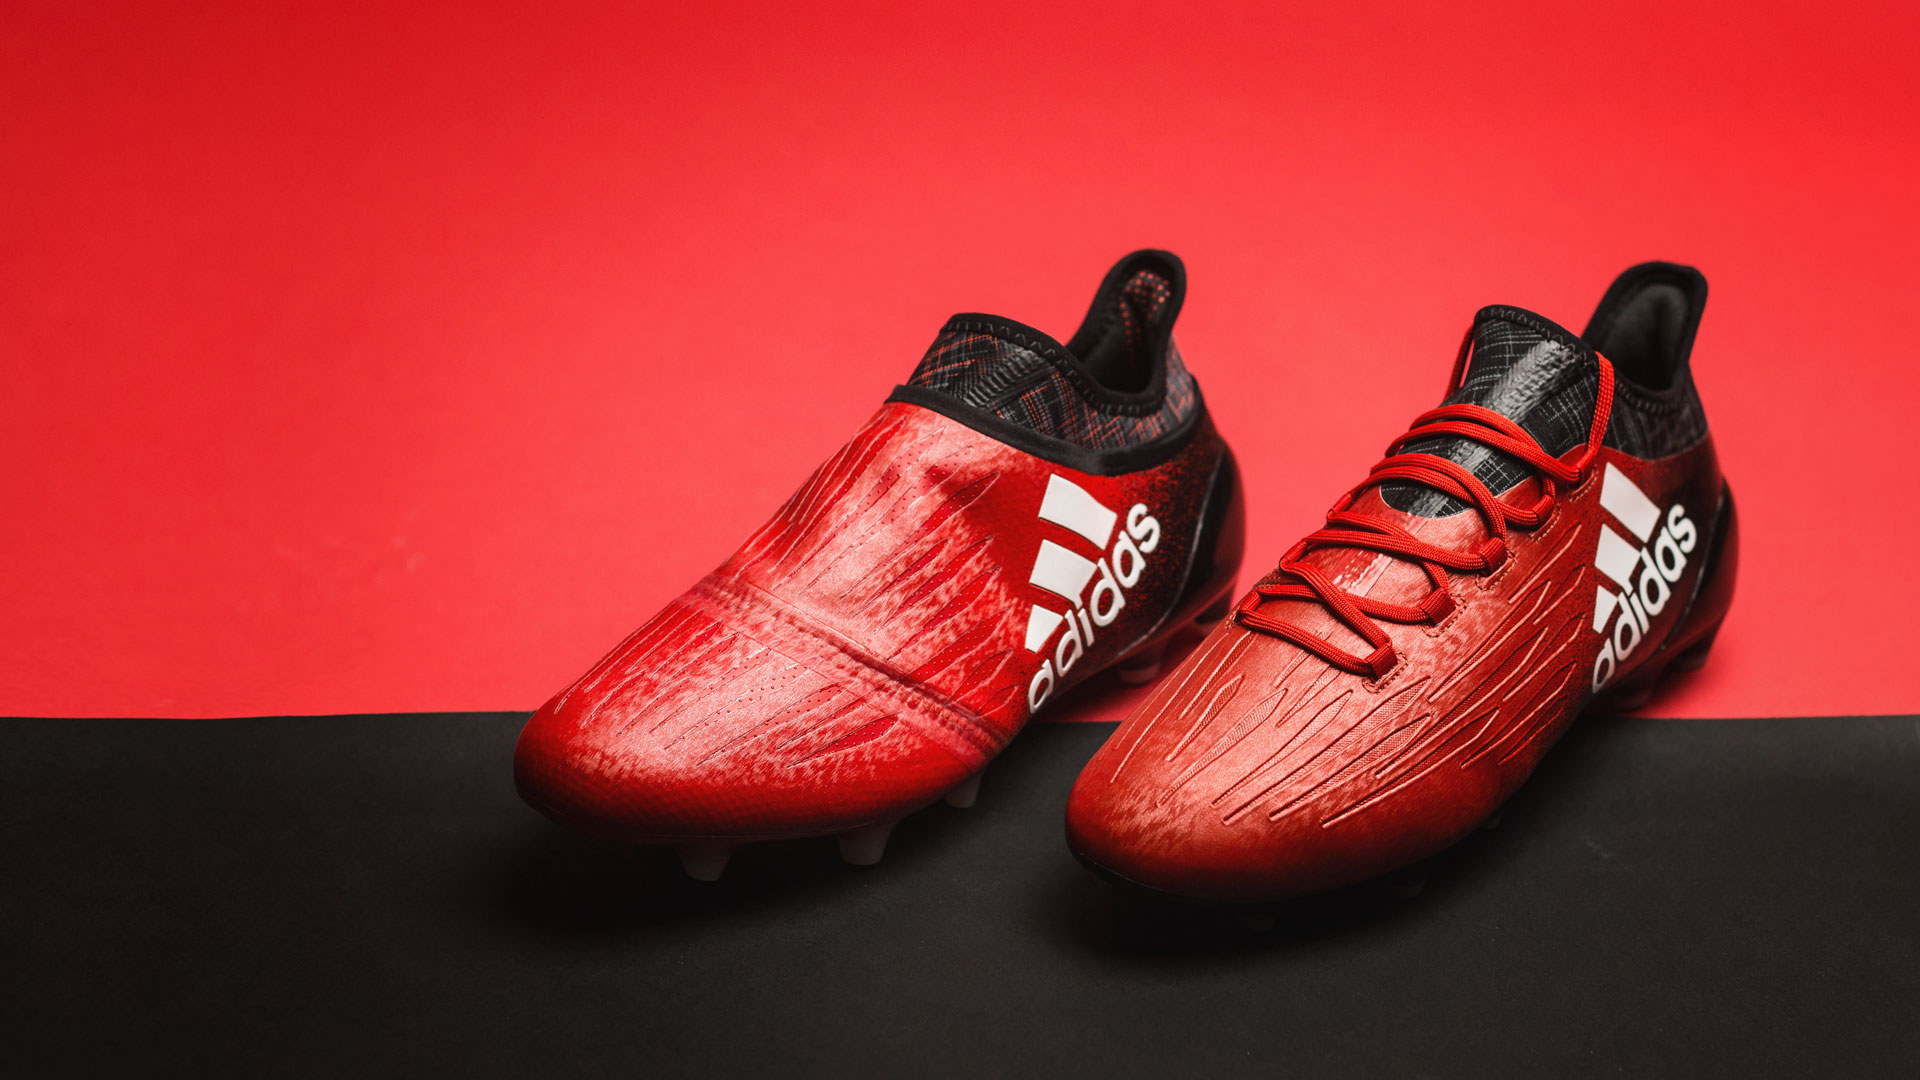 Introducing adidas X 16 as part of the 